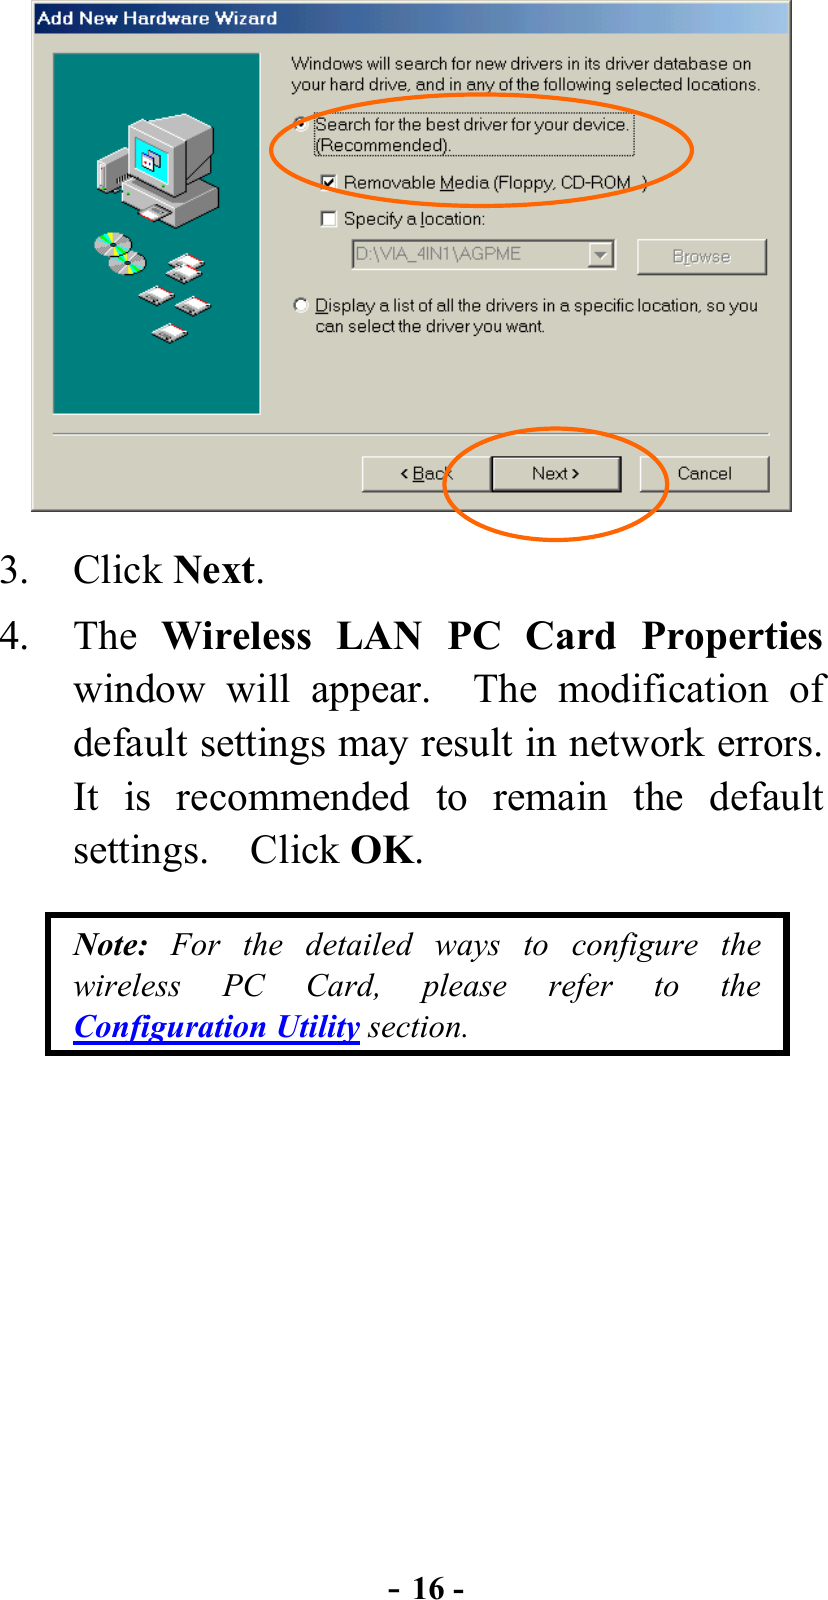  - 16 -  3. Click Next. 4. The Wireless LAN PC Card Properties window will appear.  The modification of default settings may result in network errors.   It is recommended to remain the default settings.  Click OK. Note: For the detailed ways to configure the wireless PC Card, please refer to the Configuration Utility section. 